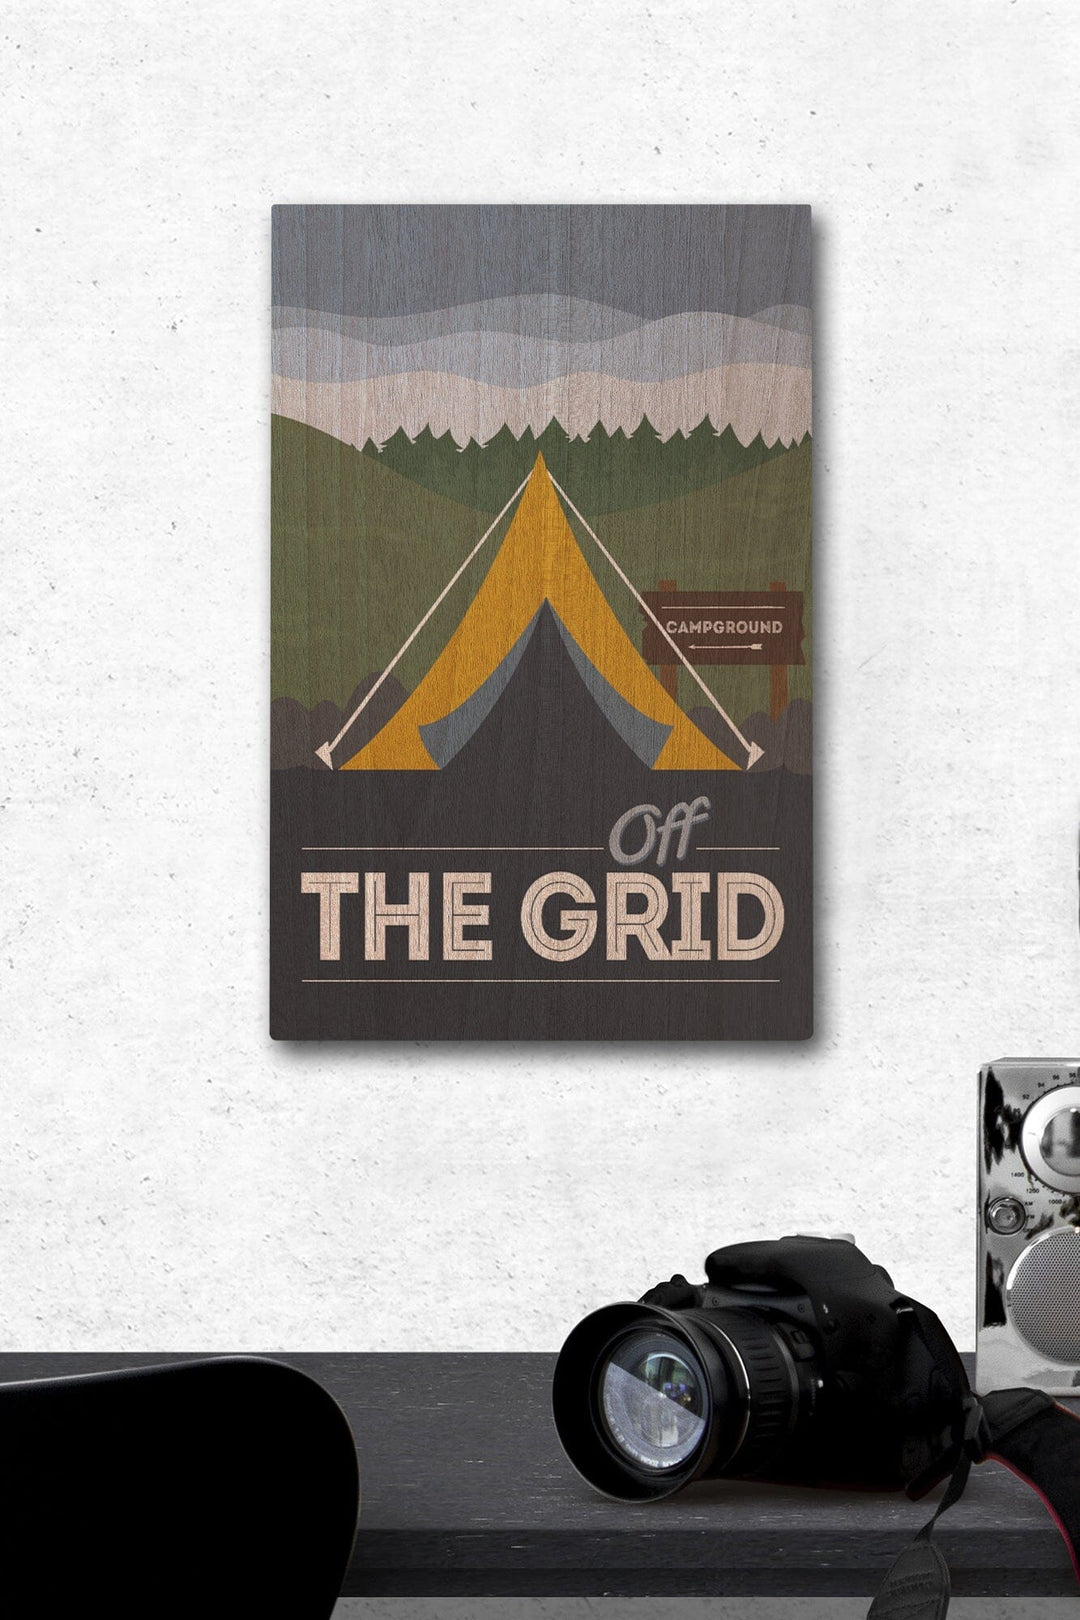 Off the Grid, Tent, Vector, Lantern Press Artwork, Wood Signs and Postcards Wood Lantern Press 12 x 18 Wood Gallery Print 